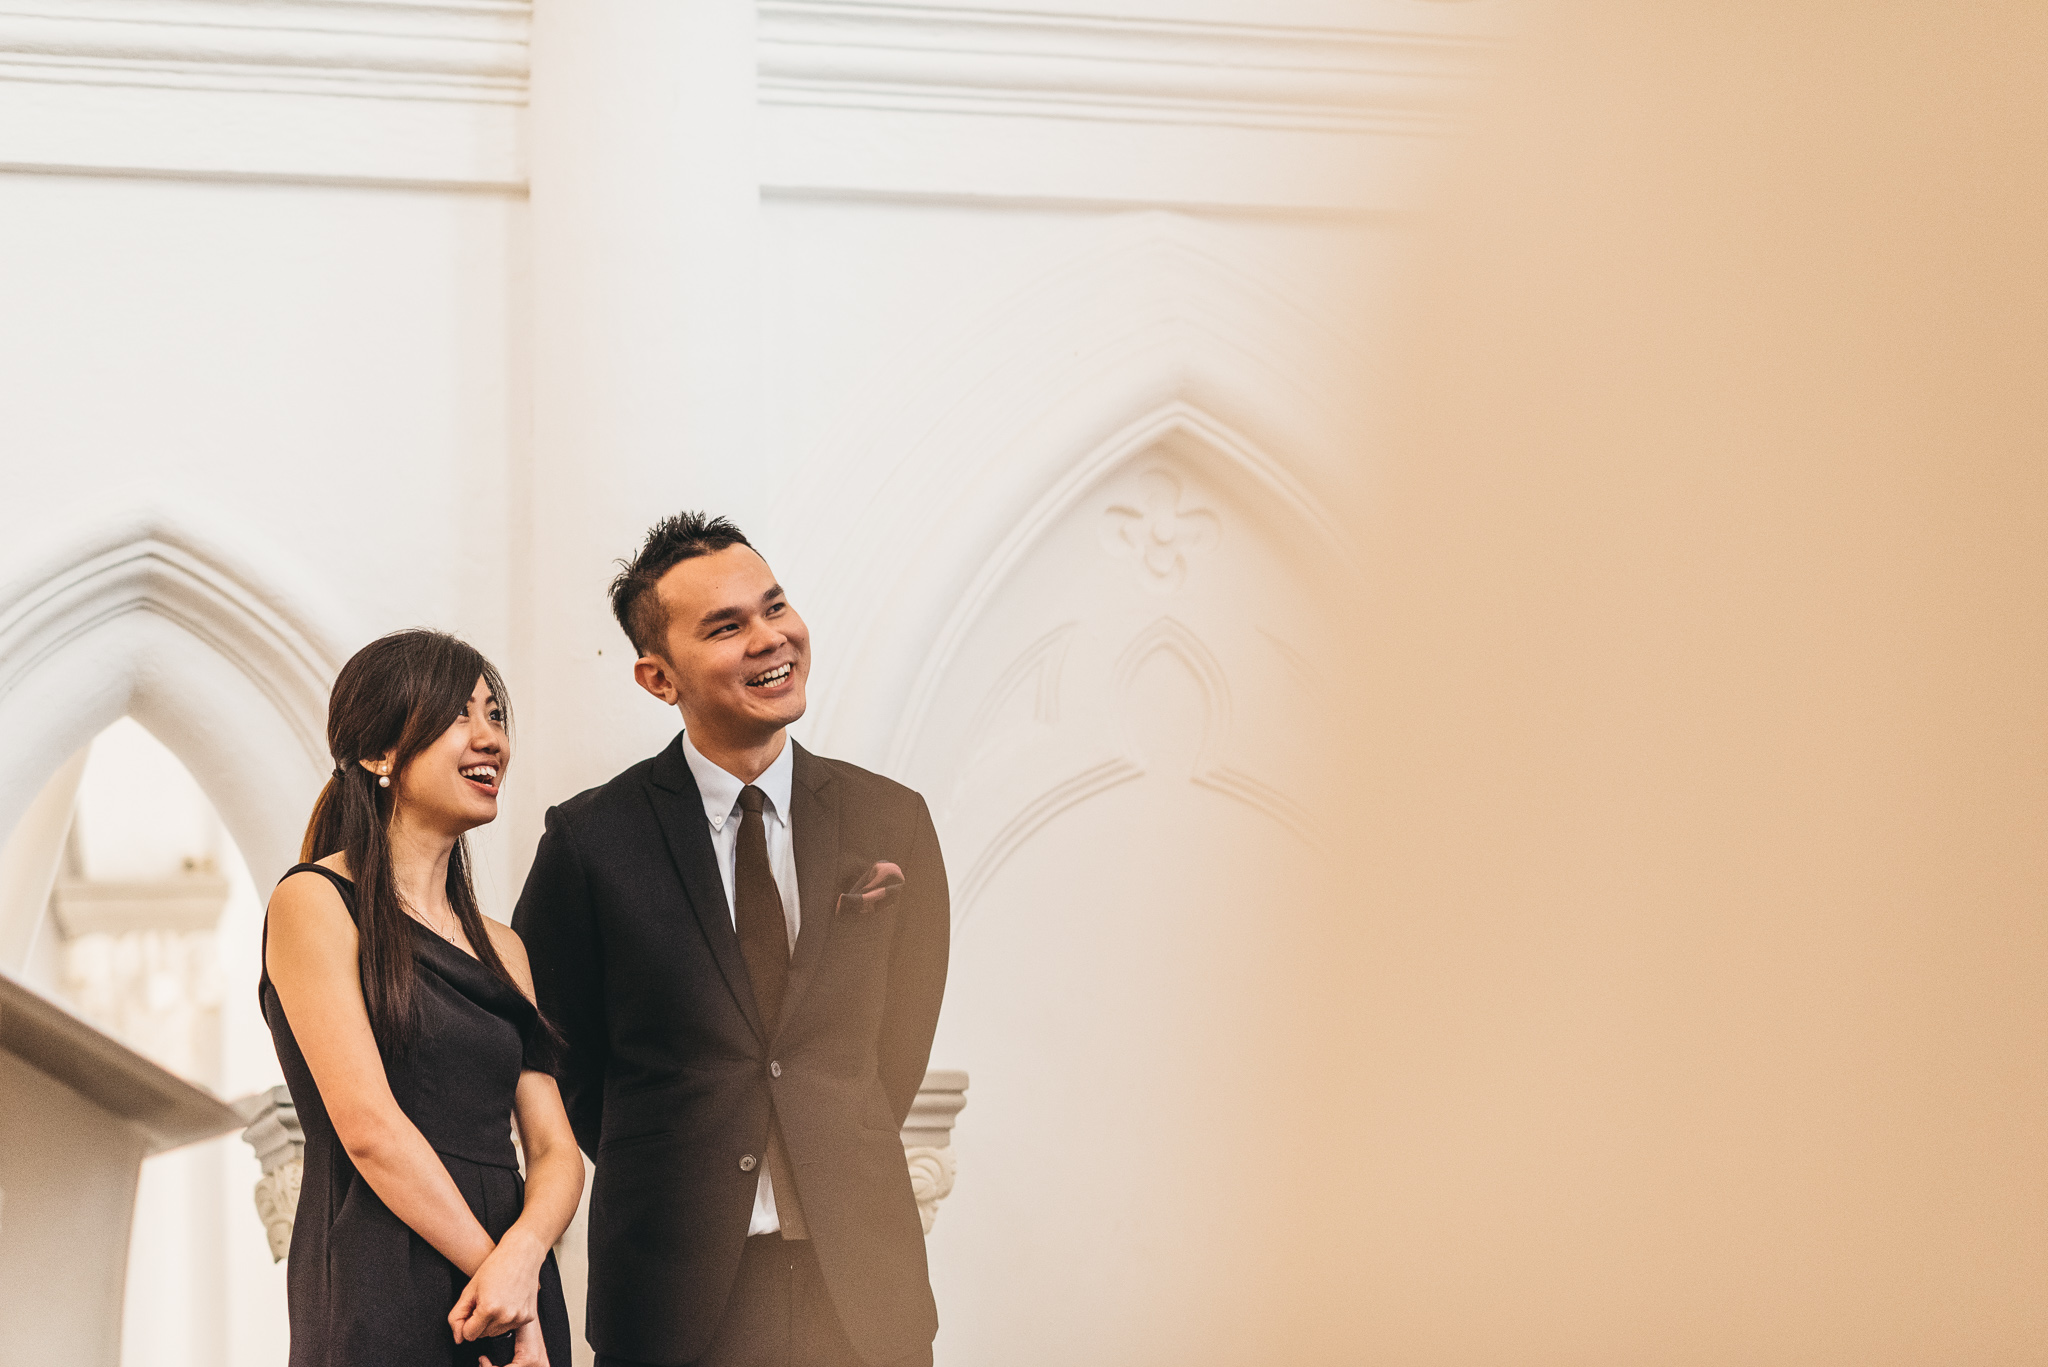 Alice & Wei Bang Wedding Day Highlights (resized for sharing) - 091.jpg